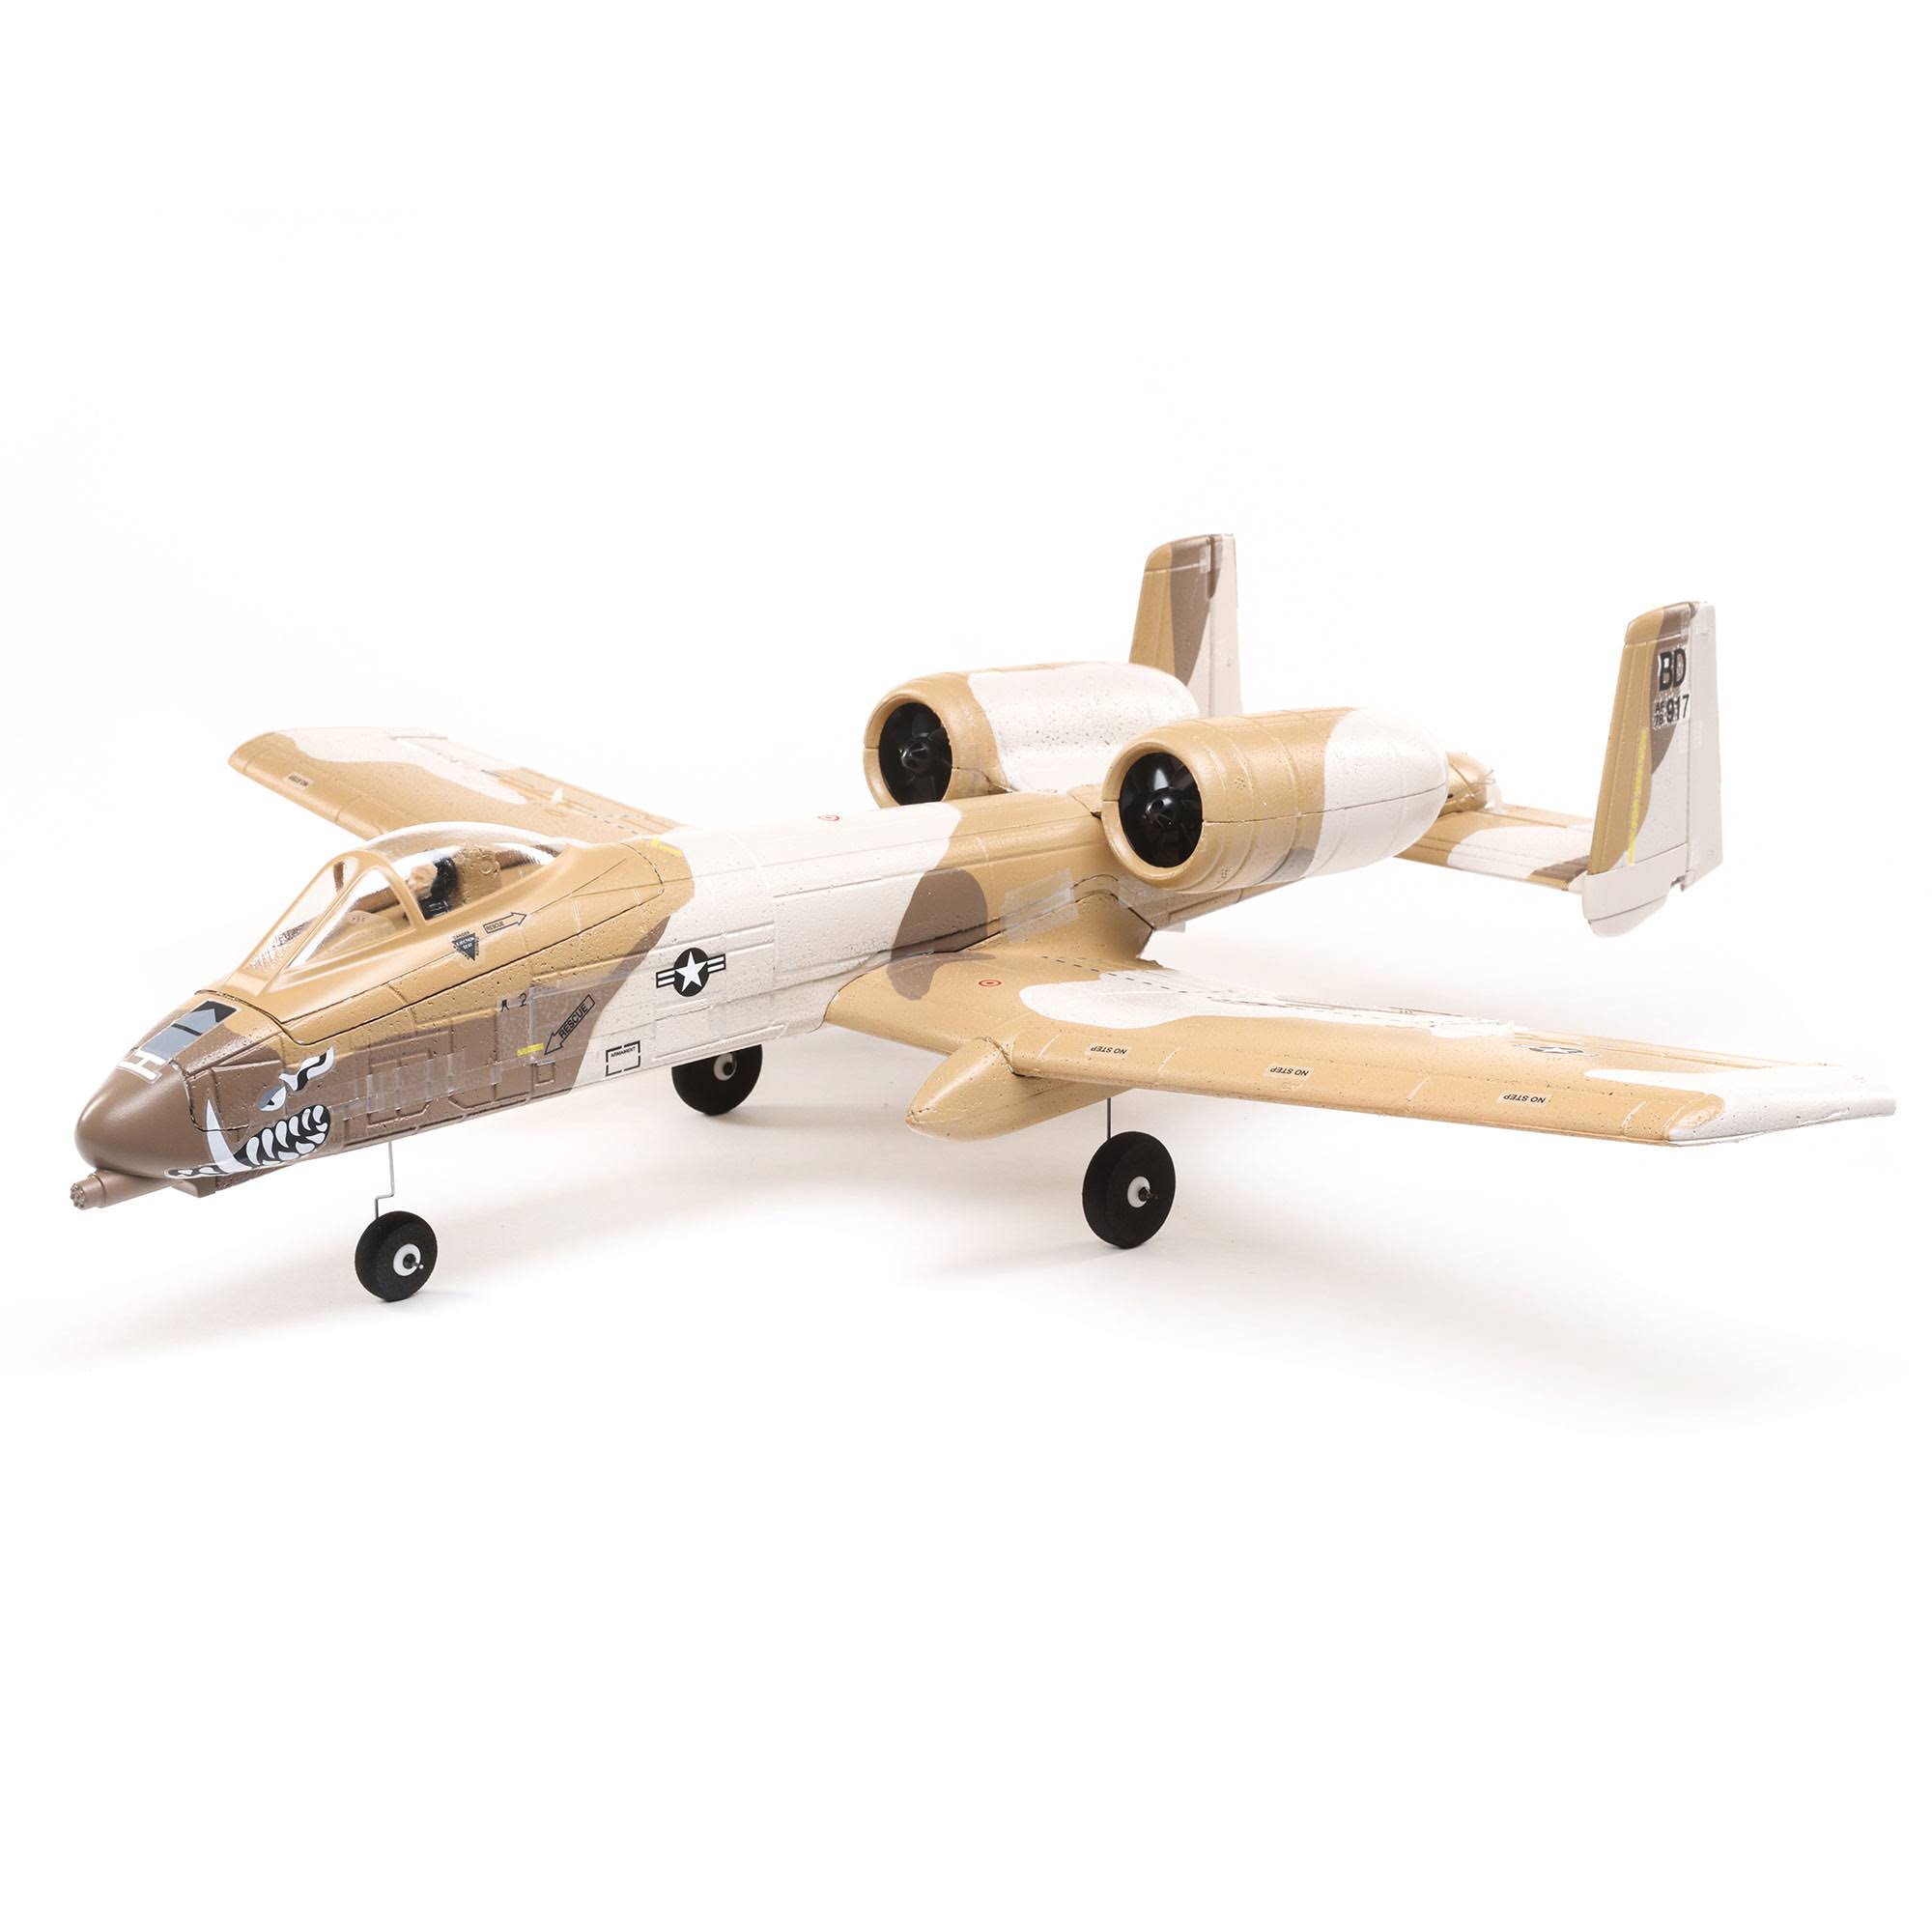 E-flite EFLU6550 UMX A-10 Thunderbolt II 30mm EDF BNF Basic with AS3X and Safe Select, 562mm